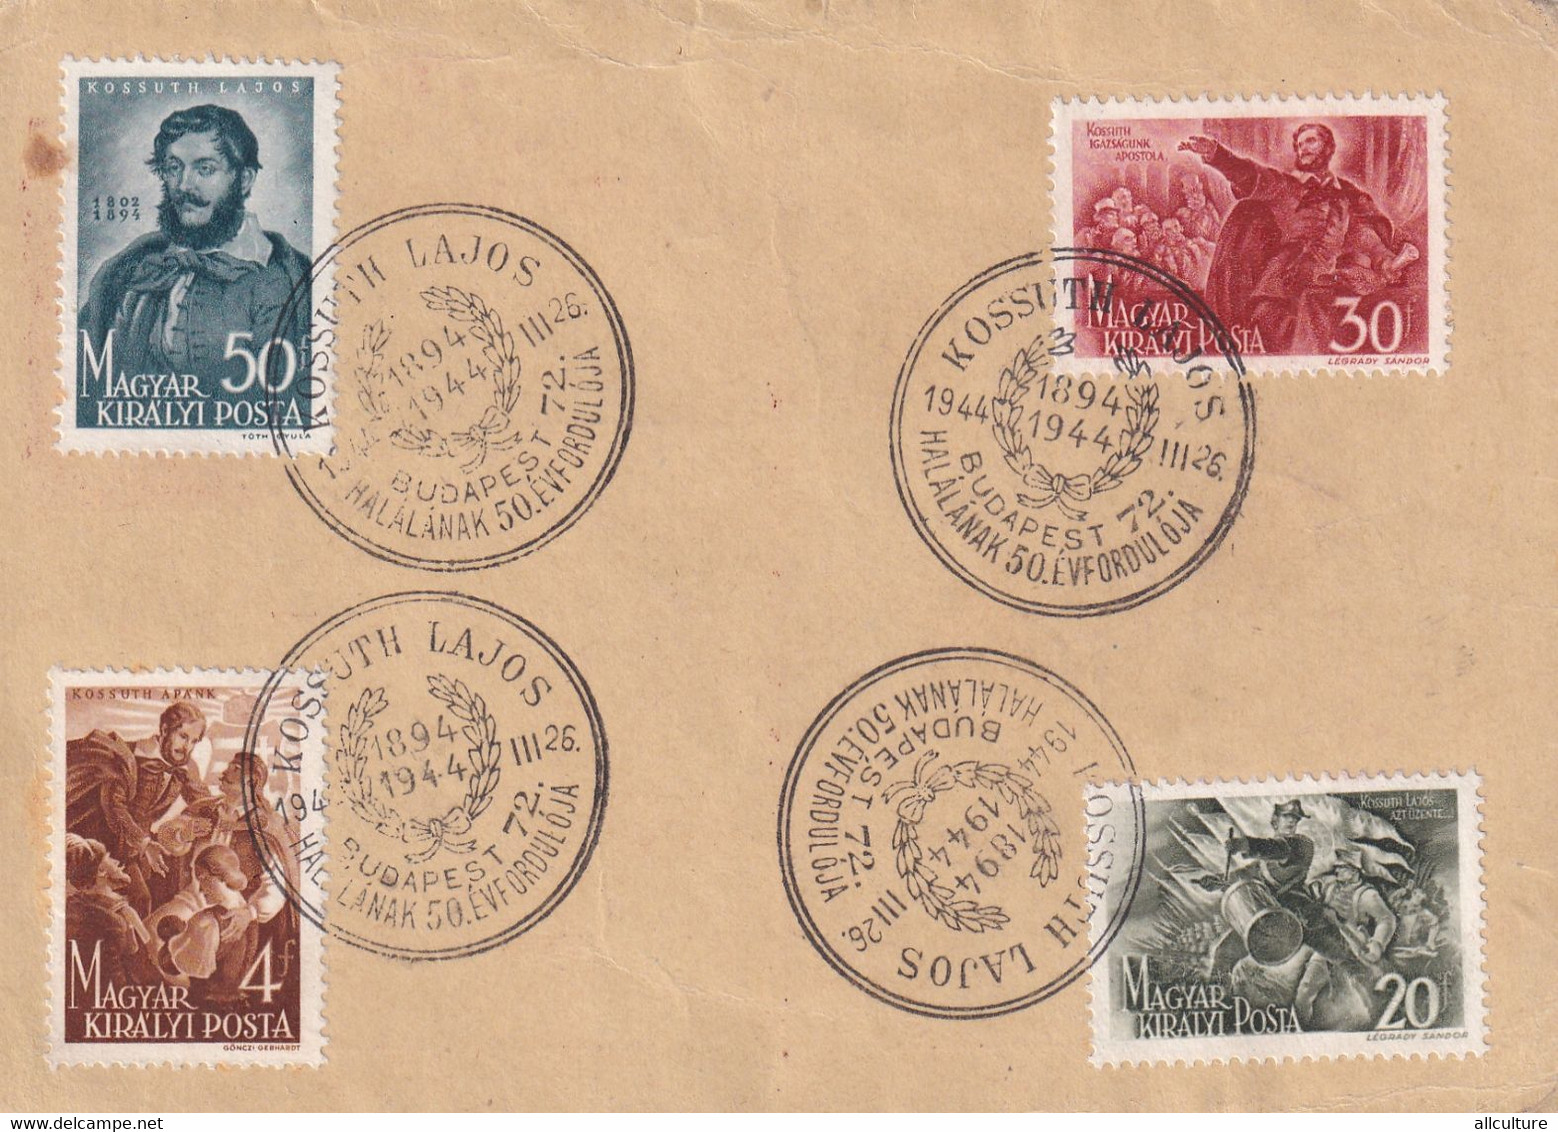 A8702 - 1944 Debrecen Hungary Postcard Cover To Vac Kossuth Lajos Stamp Issue - Postal Stationery